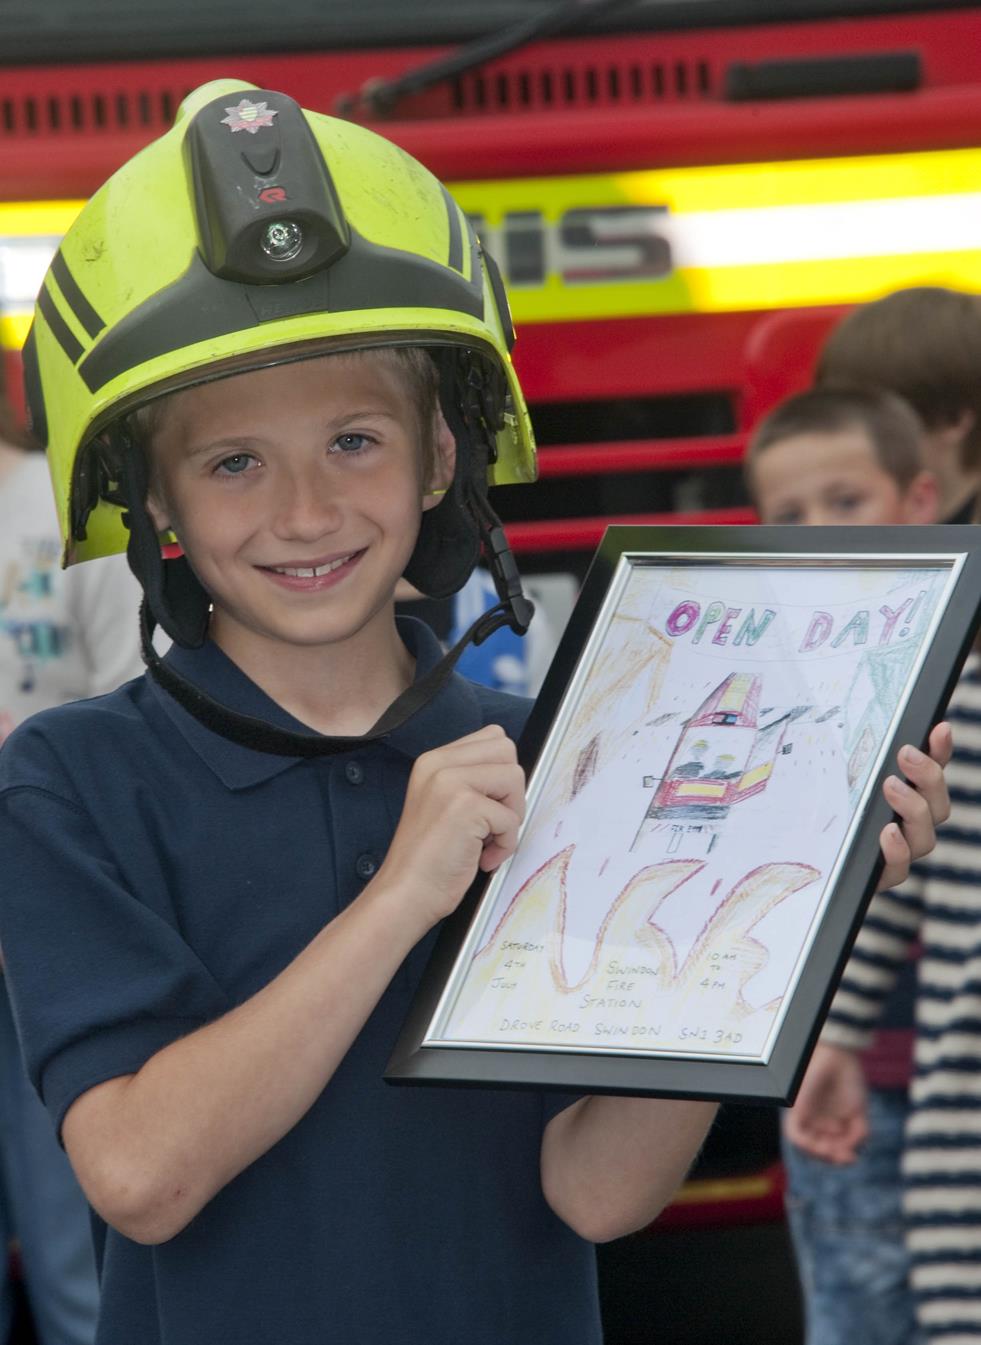 Snapped: Schoolboy Wins Promotional Poster Competition